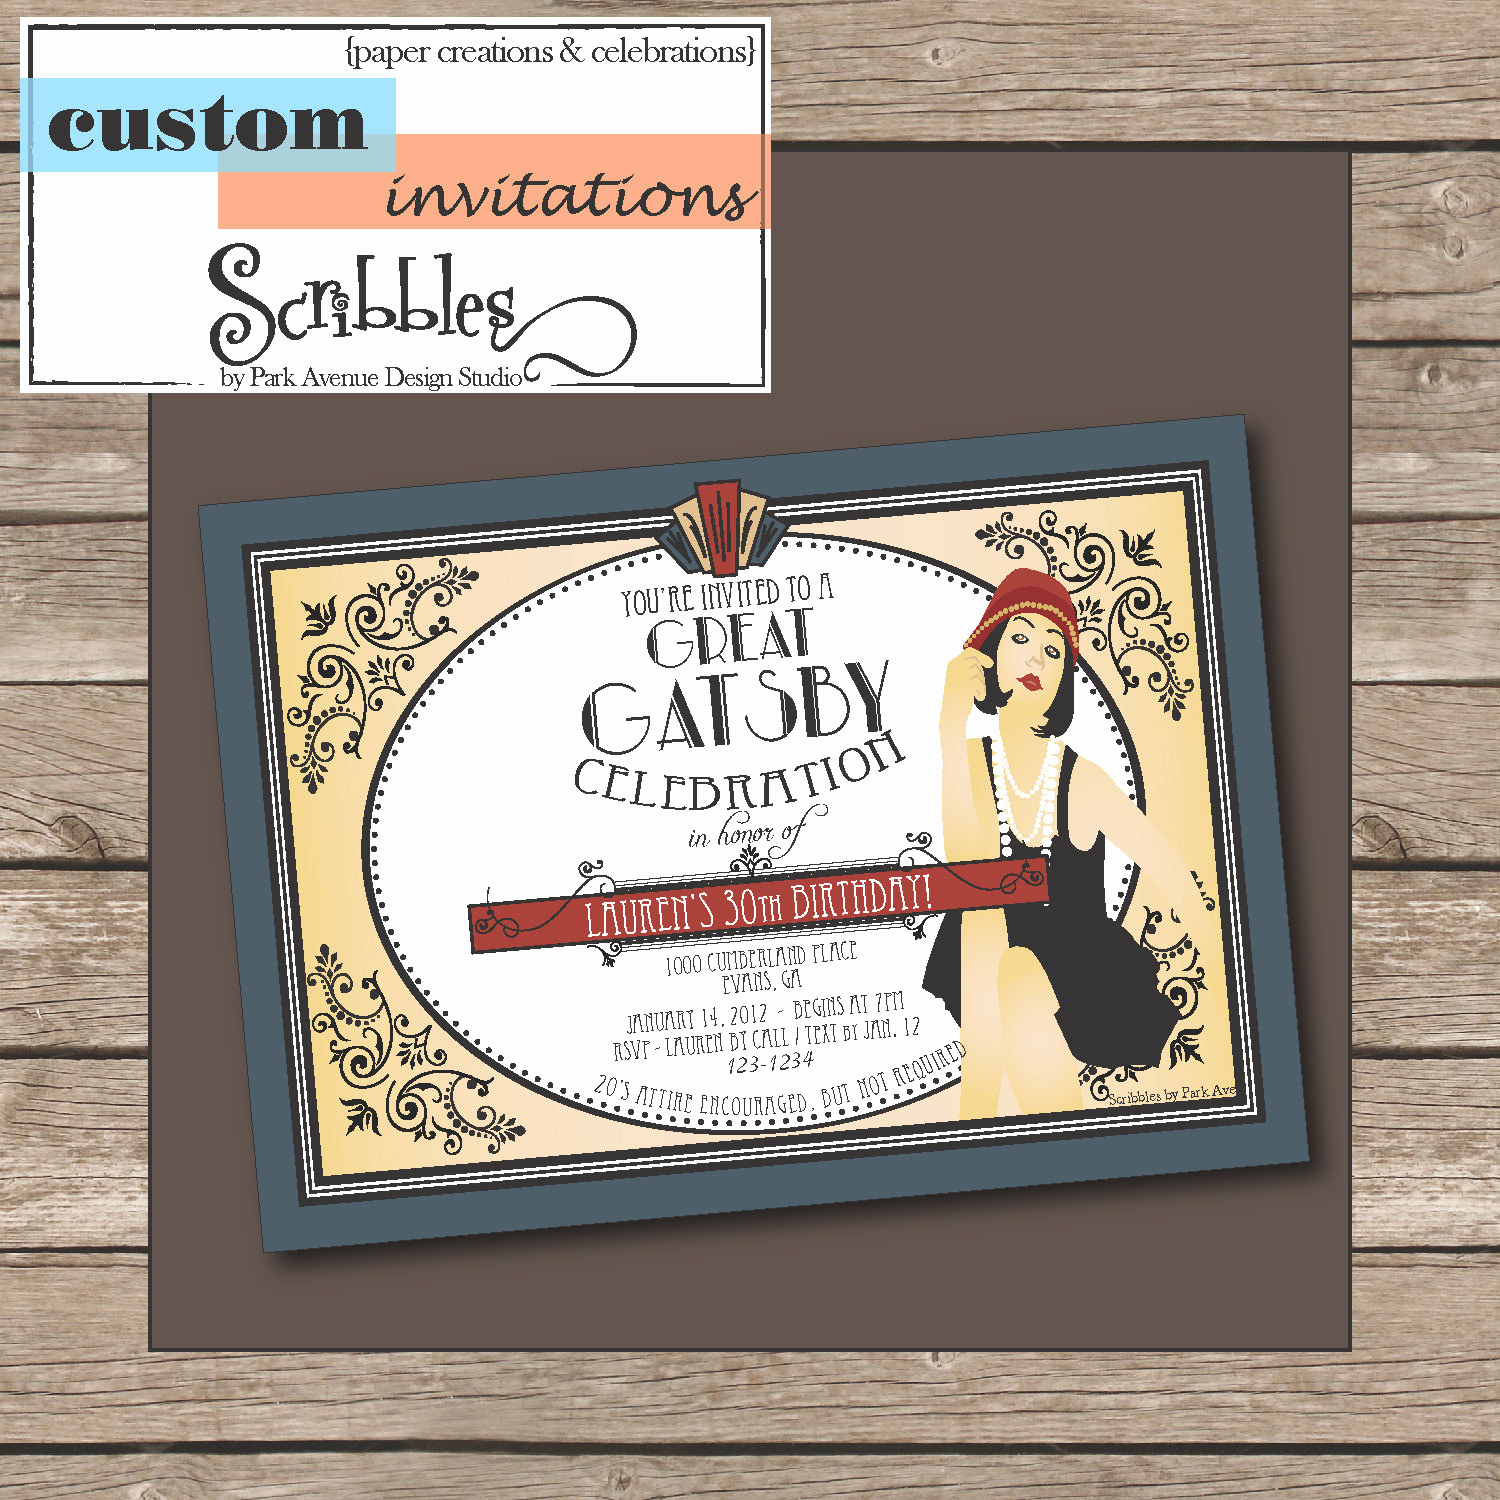 1920s Party Invitation Template Free Inspirational Roaring 1920 S Flapper Great Gatsby by Scribblesbyparkave